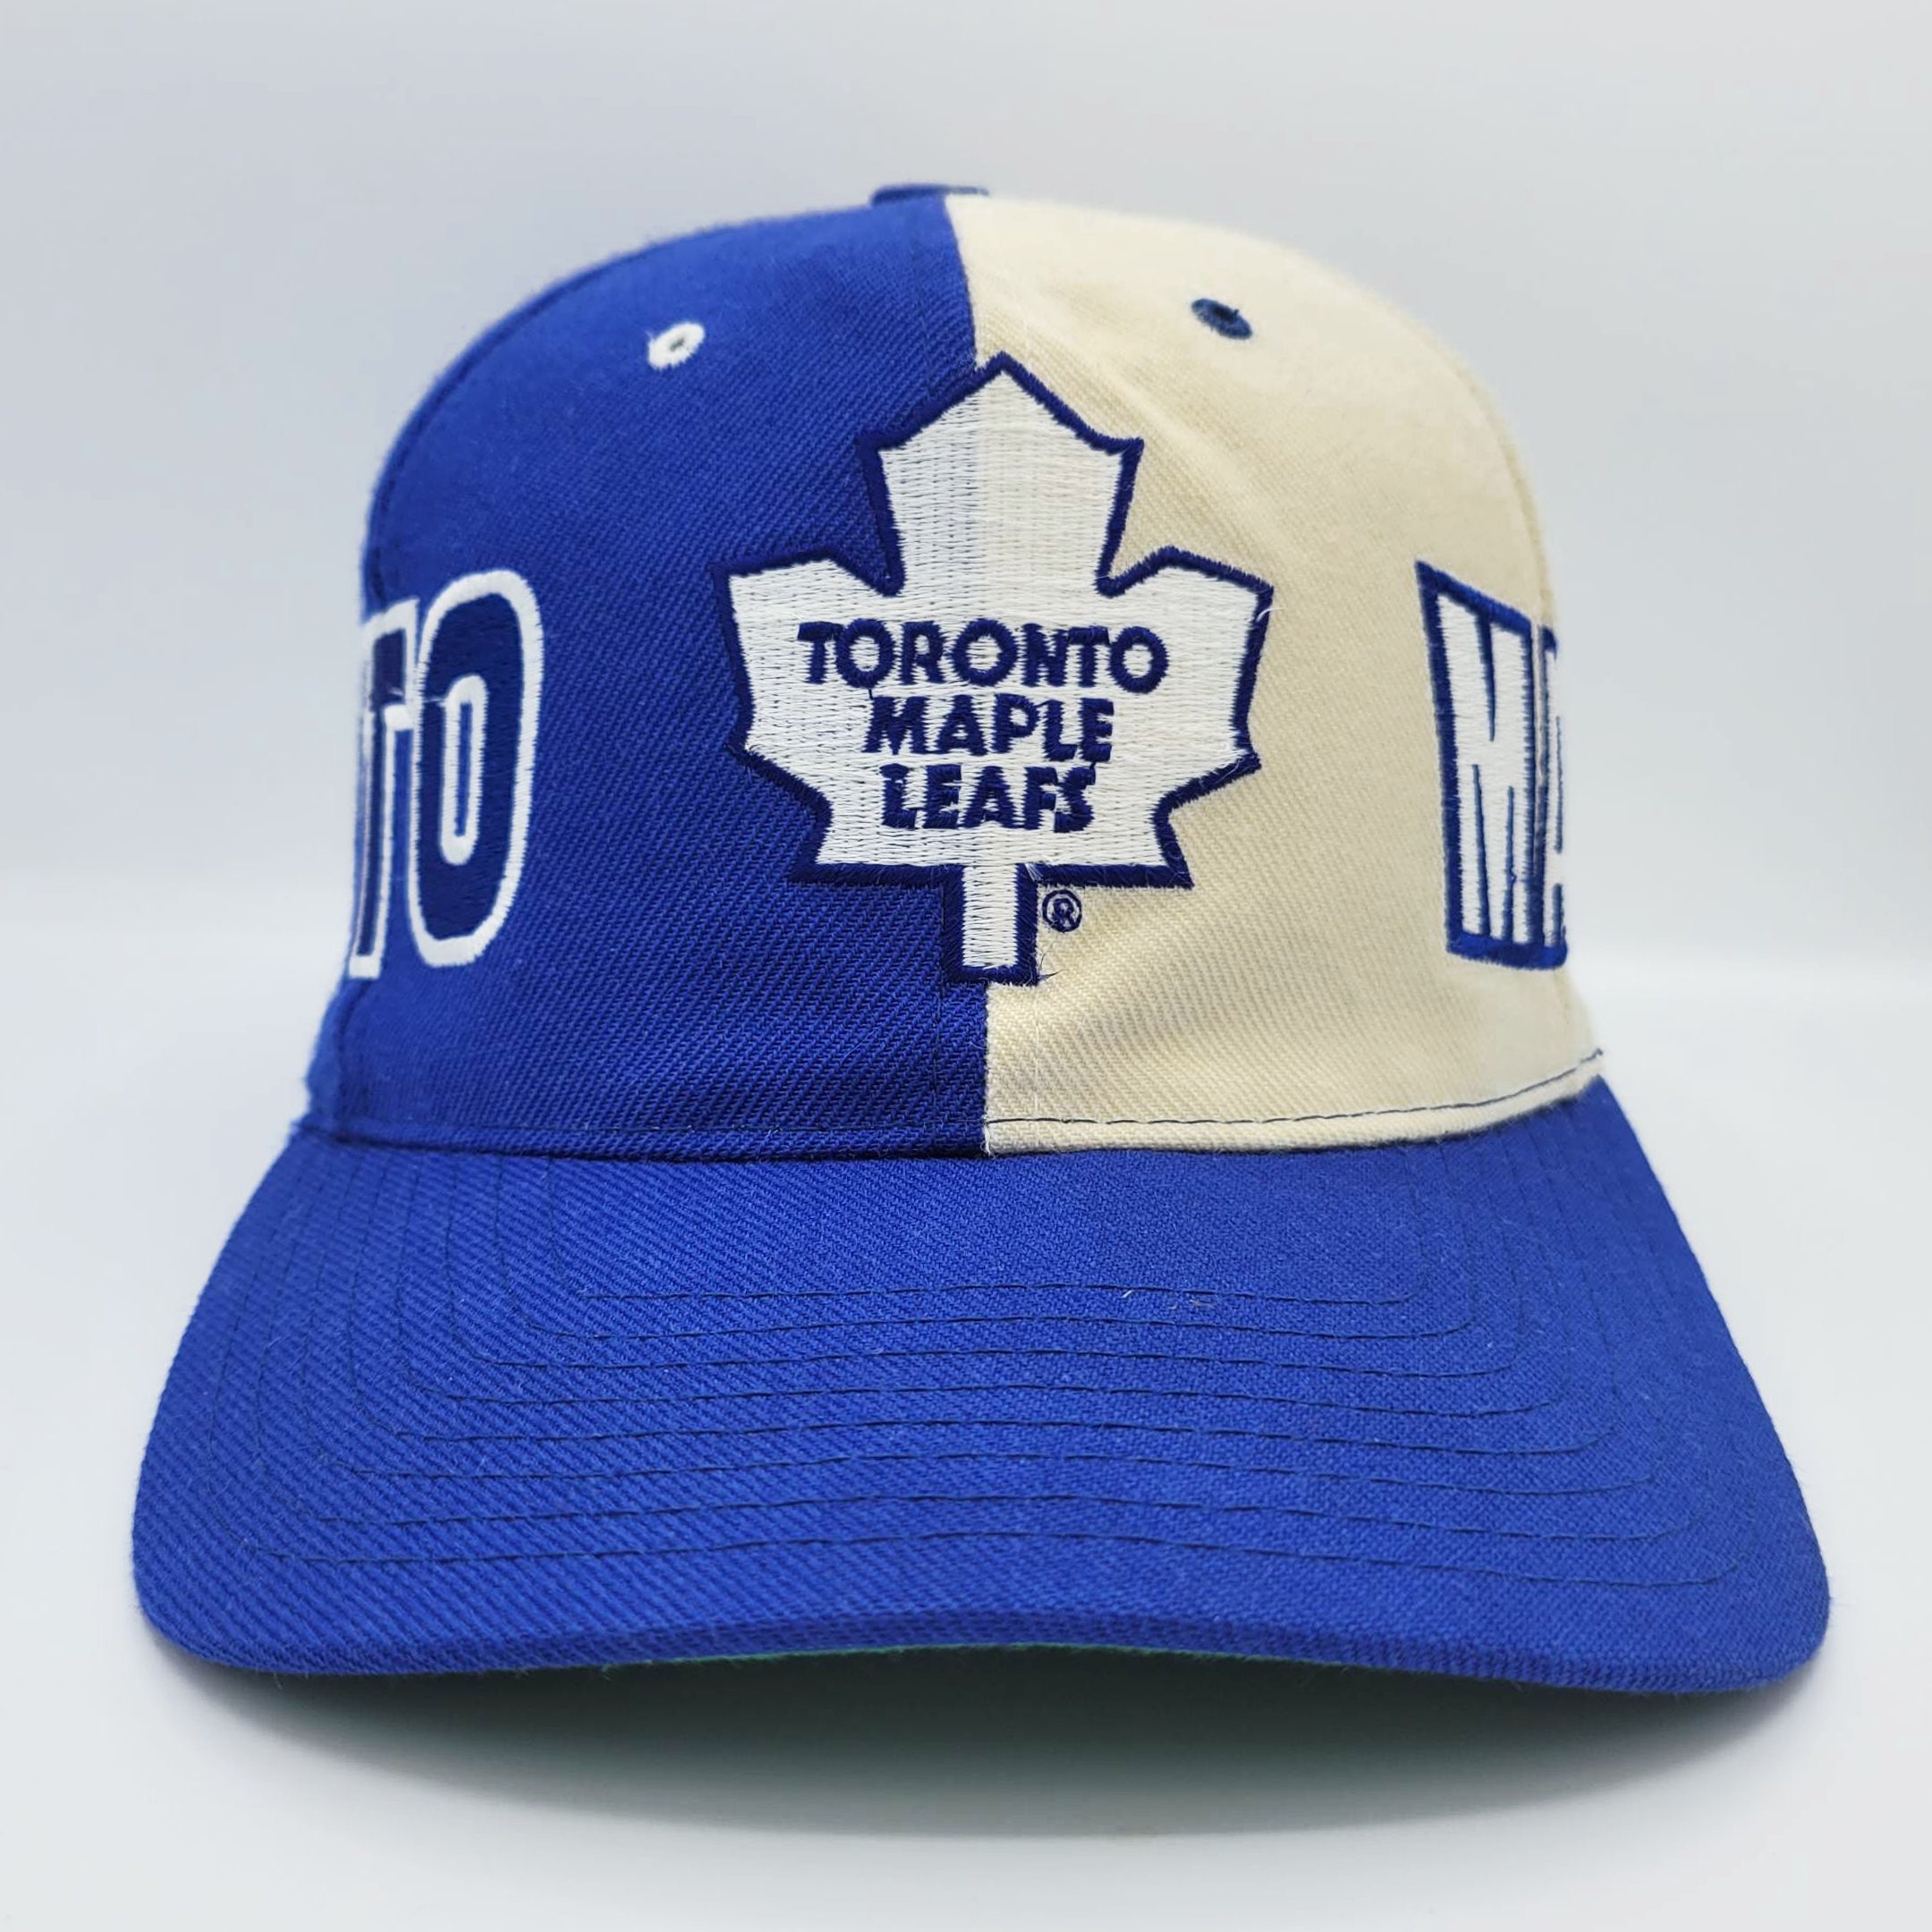 Bieber-Themed Leafs Jersey the NHL's Newest Best-Seller - The